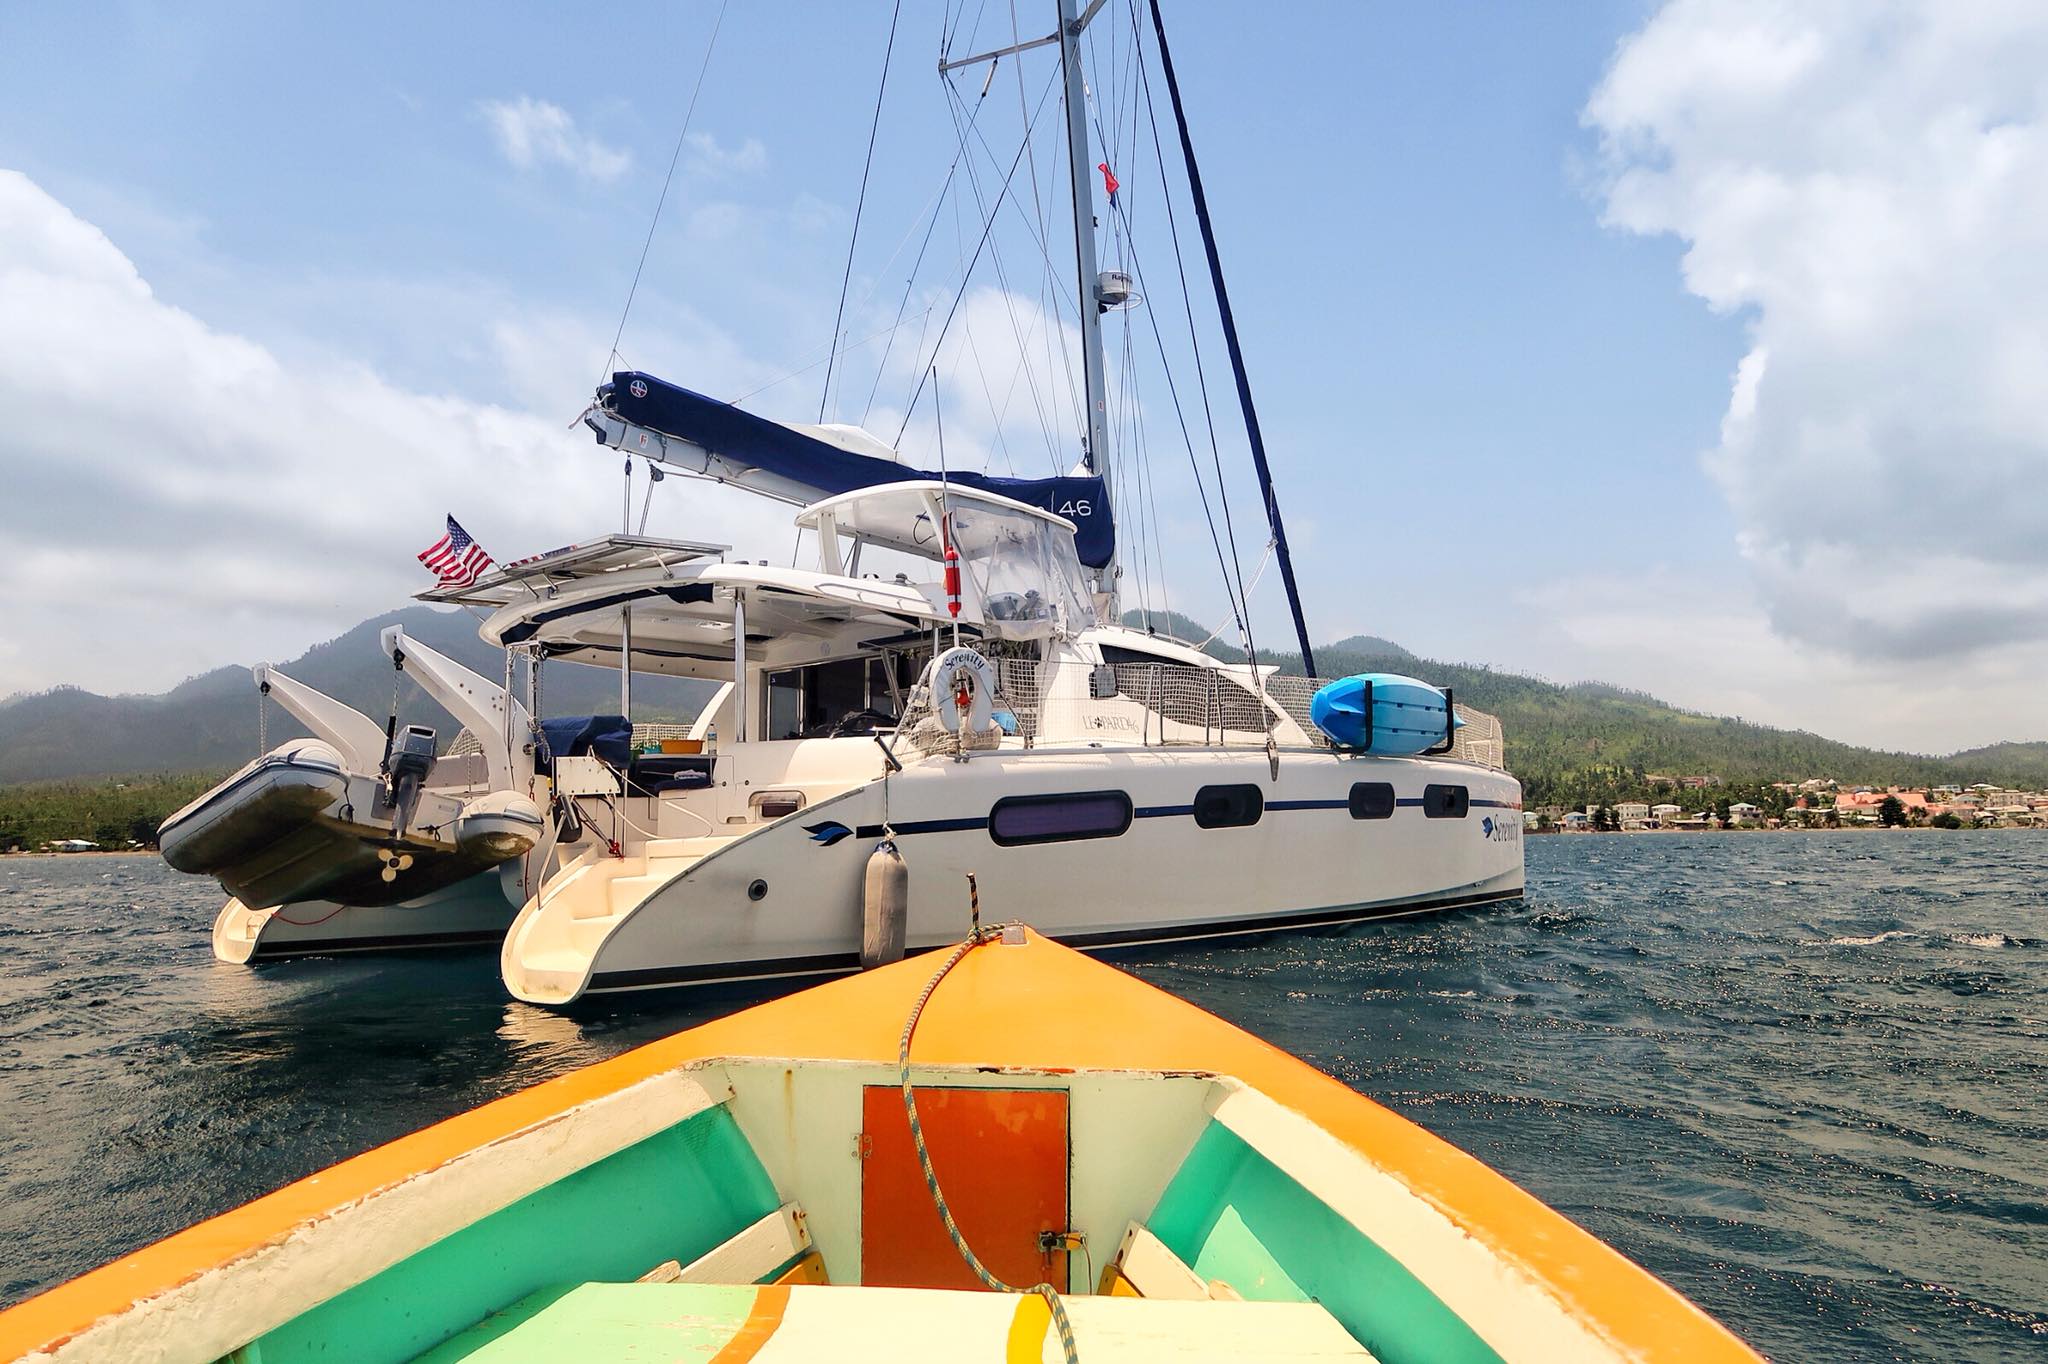 Kach Solo Sailing Adventures: Solo Trip (without Jonathan) Crossing from Martinique to Dominica (country #103)⛵️🏝🌞